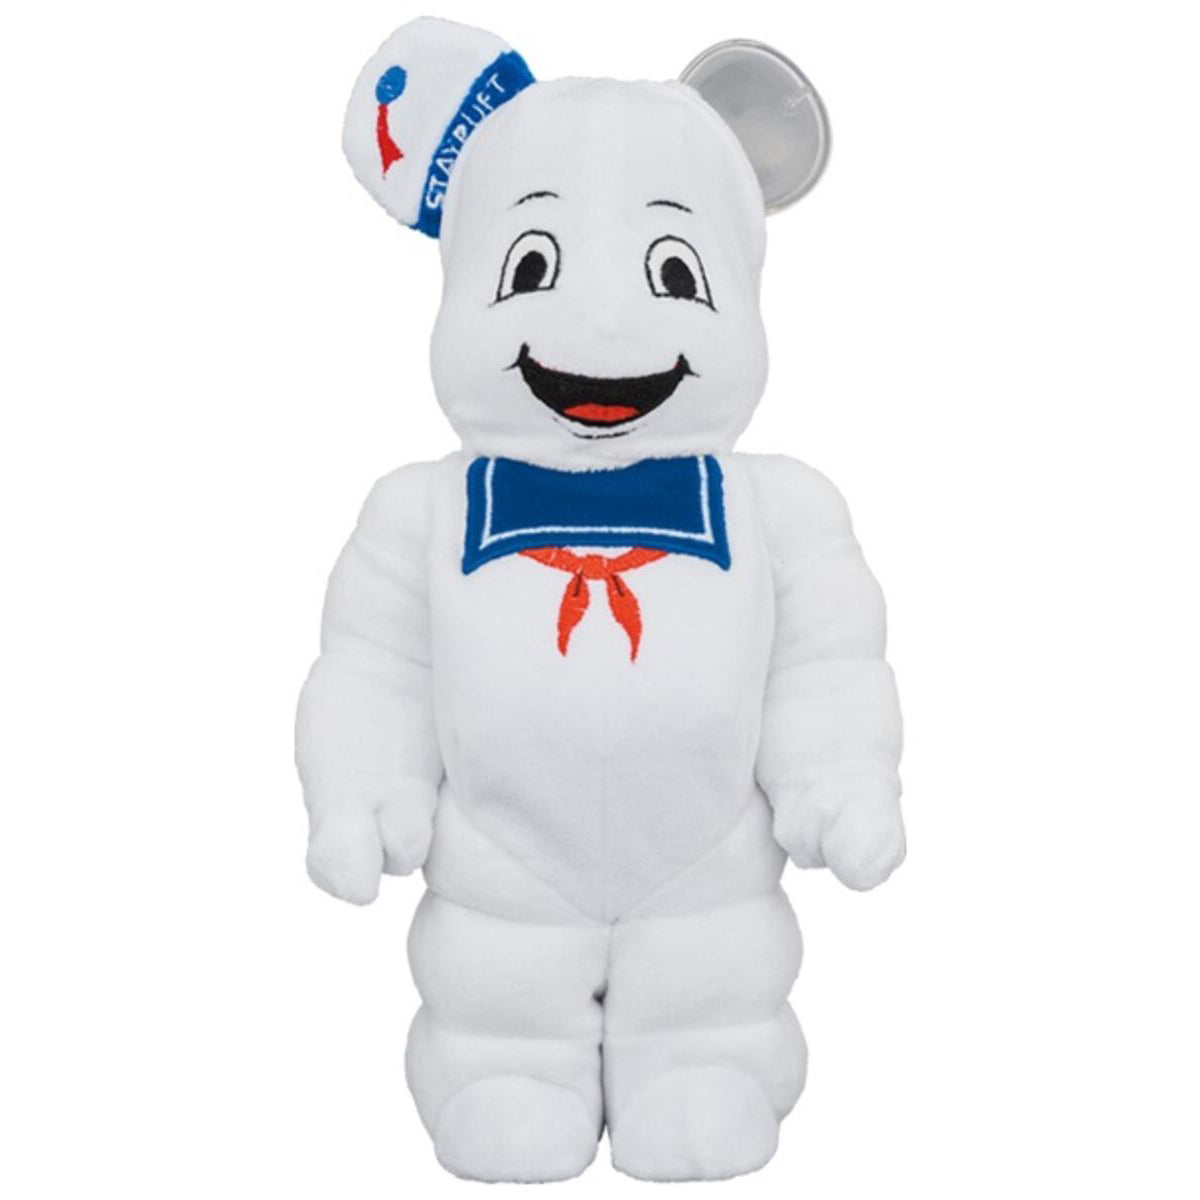 STAY PUFT MARSHMALLOW MAN X BE@RBRICK COSTUME Ver. 400%